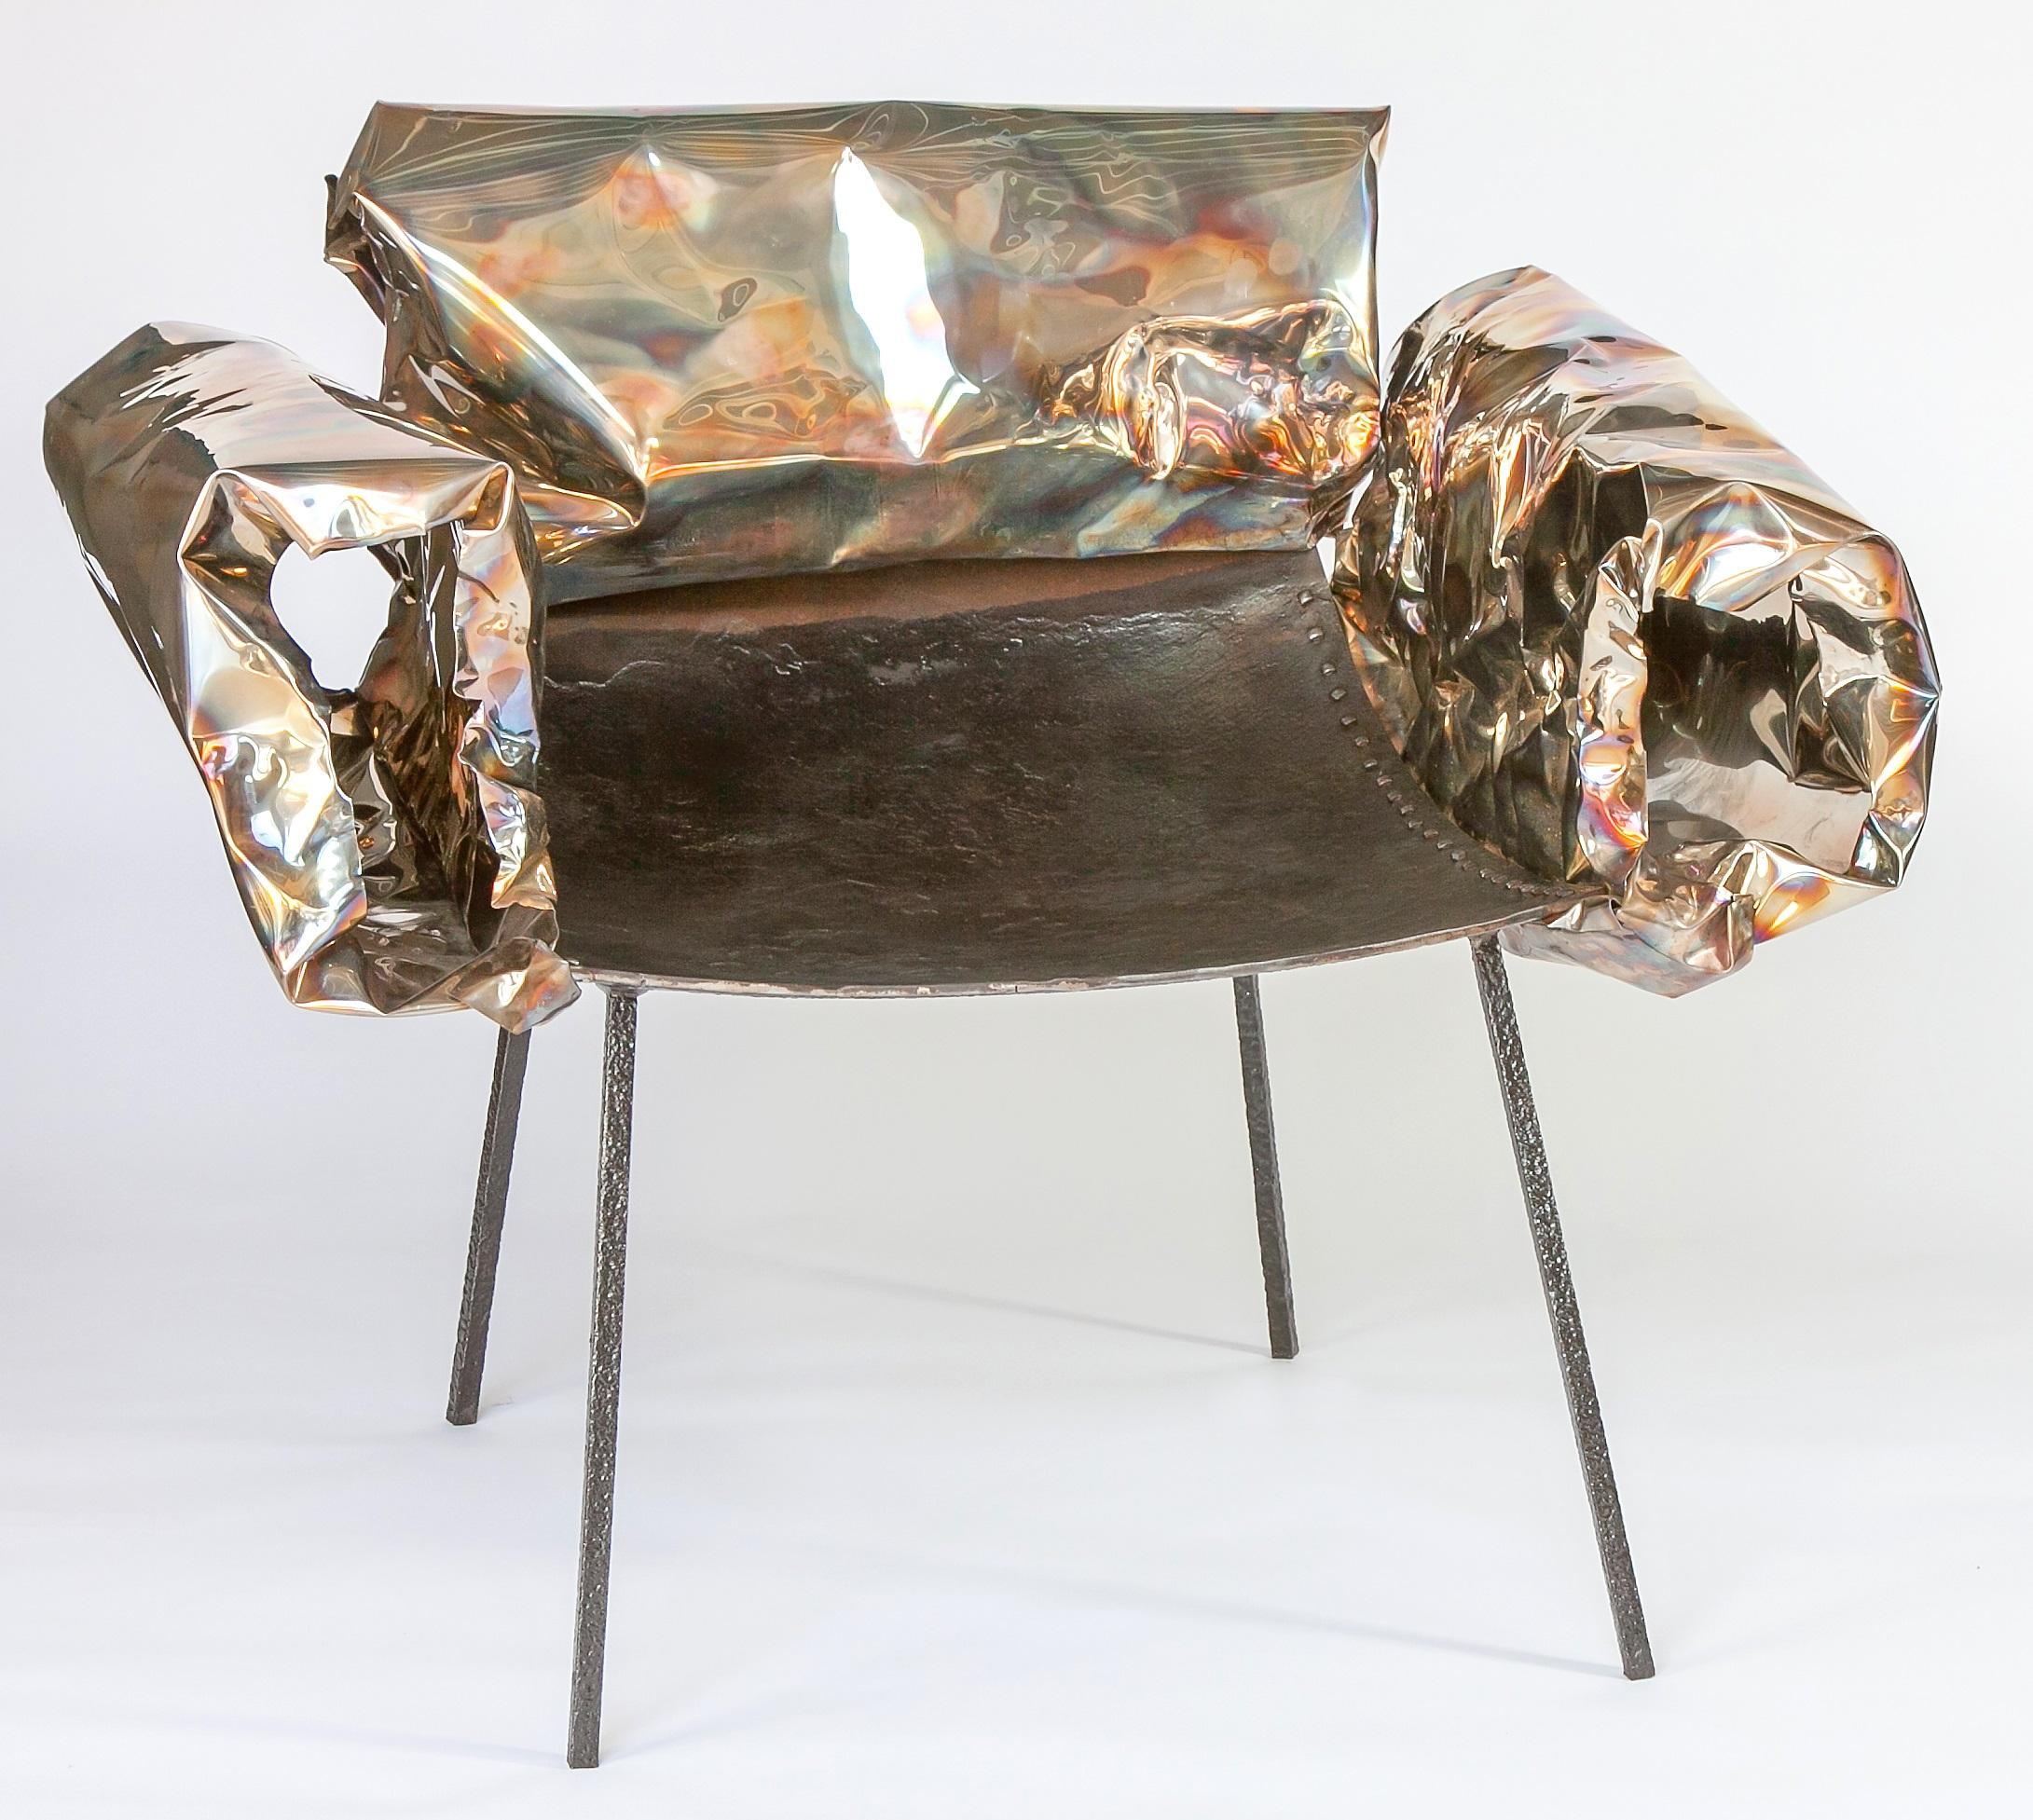 Balkan Stainless Steel Iron Puffy Chair by Anadora Lupo  For Sale